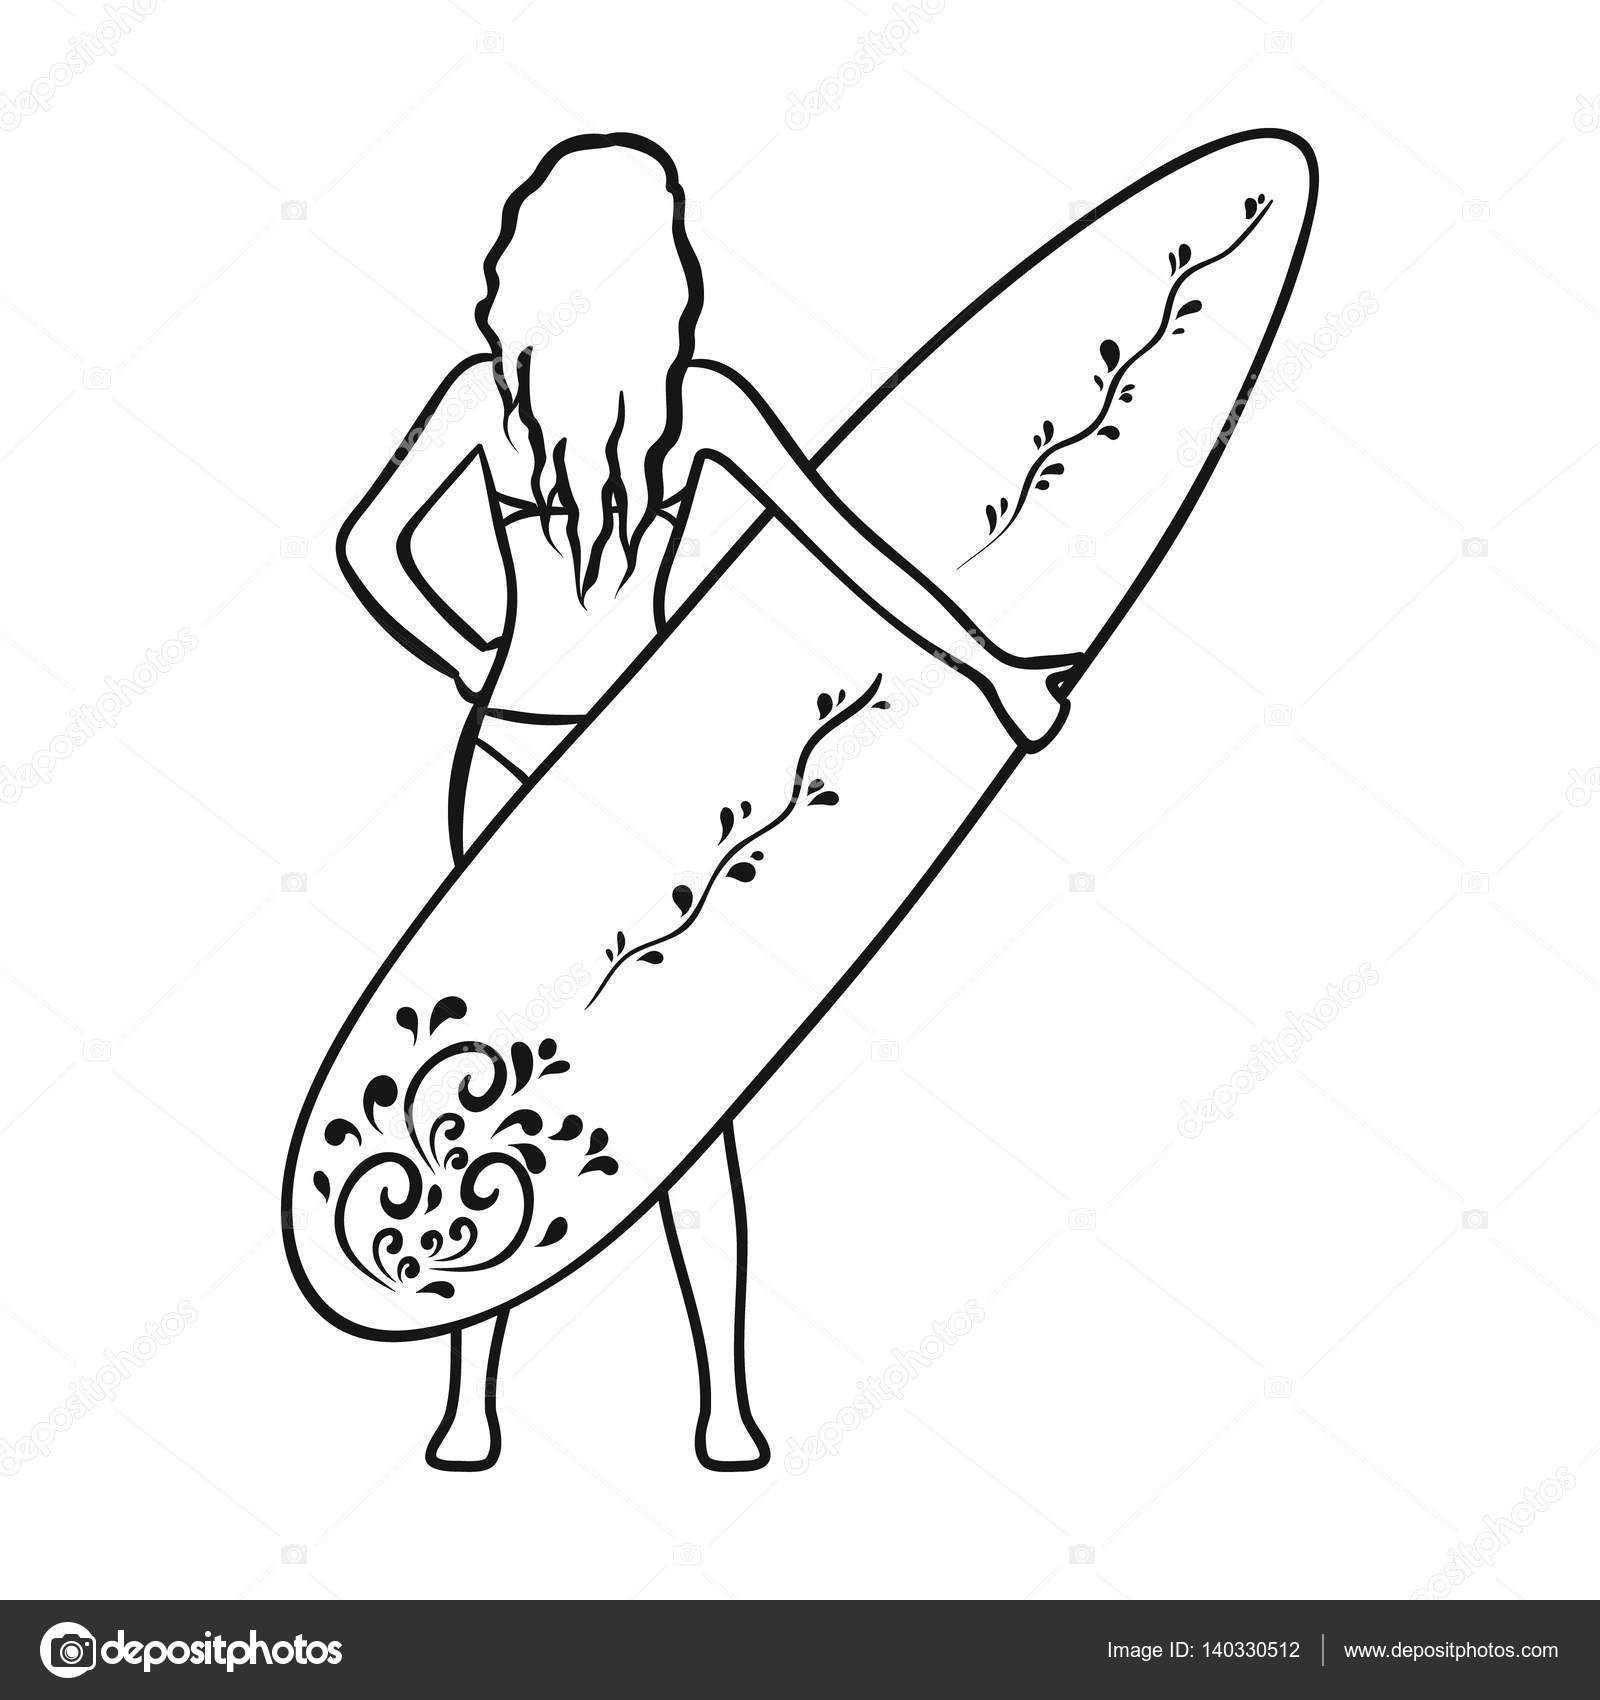 Surfing Board Drawing - Drawing Image